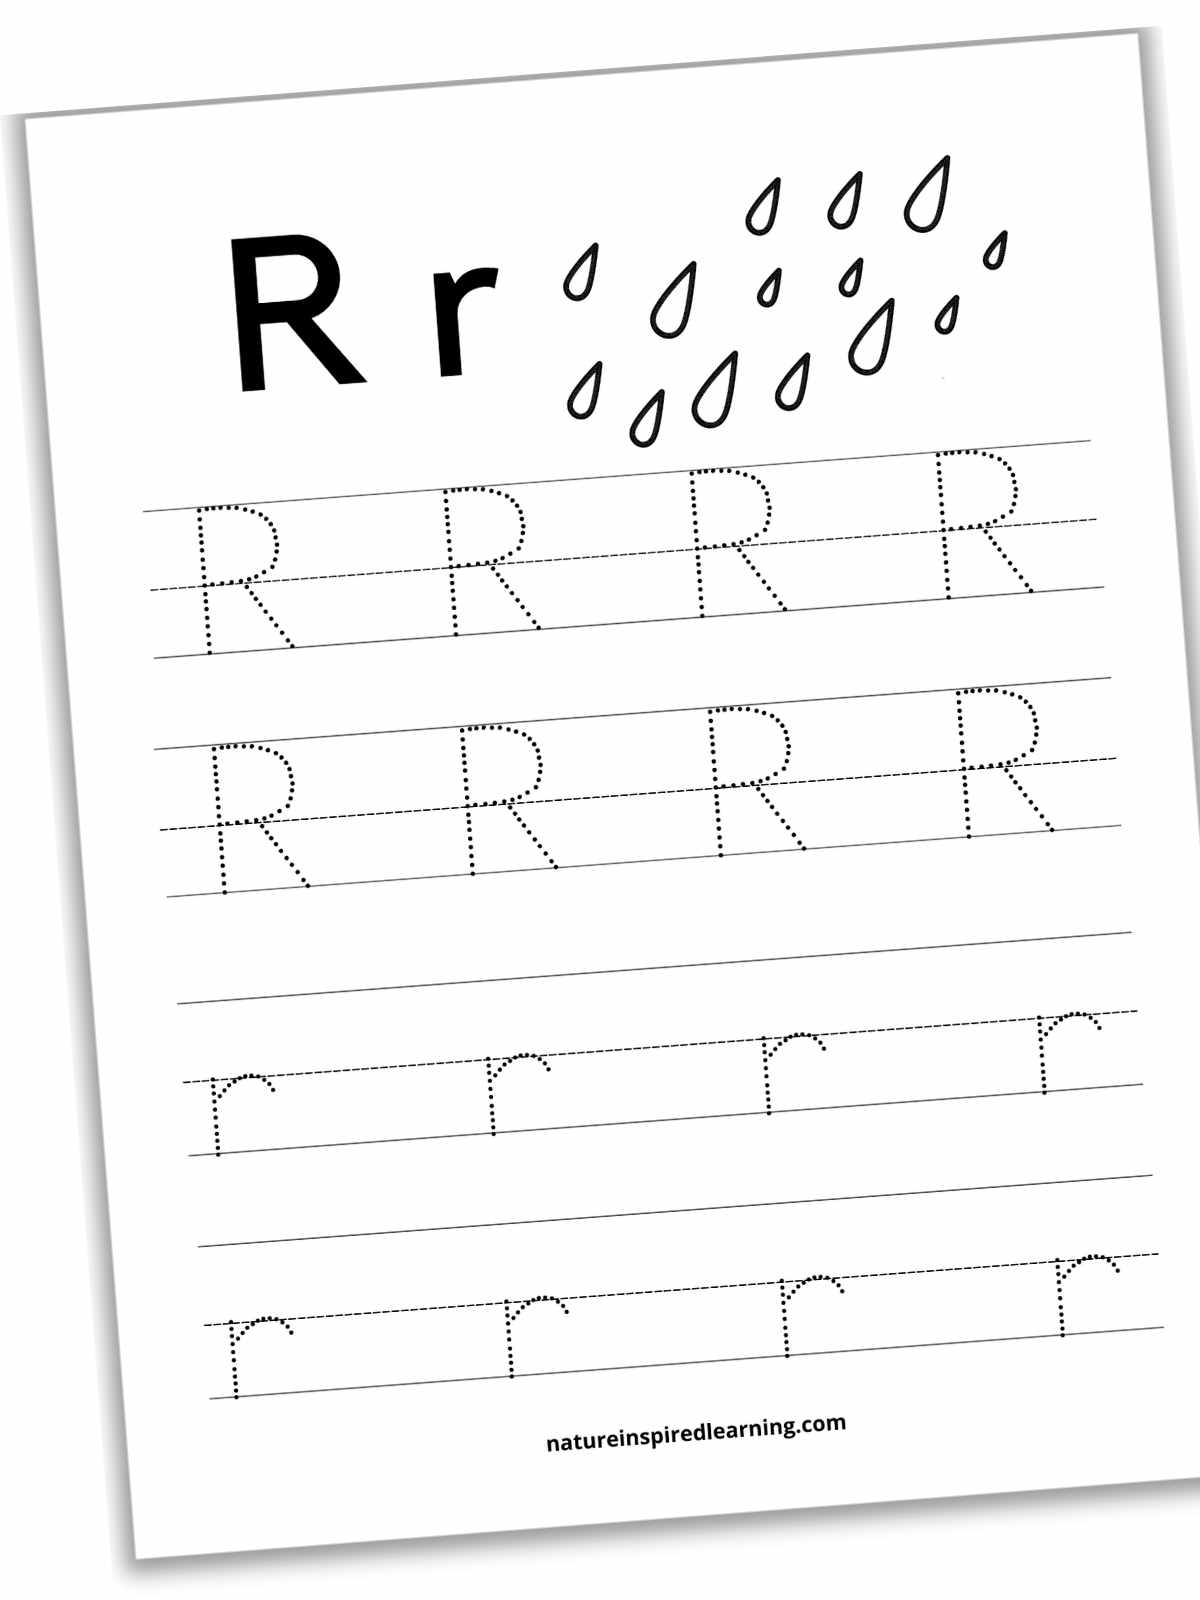 Worksheet with lines with dotted capital and lowercase r's with raindrops at top